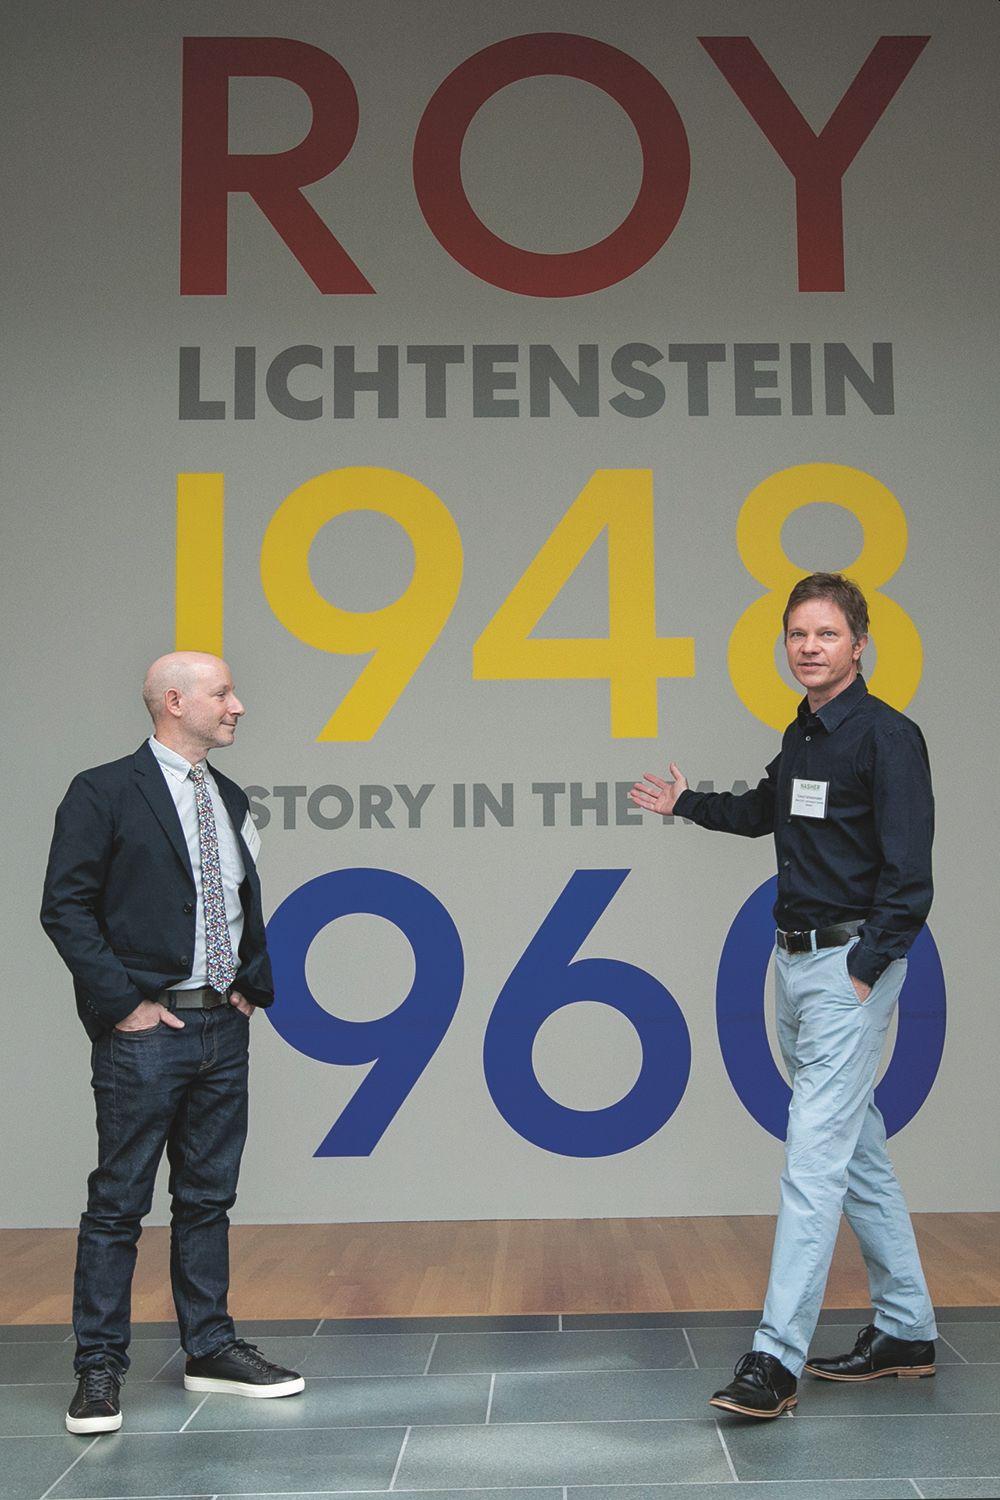 THUMBNAIL: Nasher co-curator Marshall N. Price and museum director Trevor Schoonmaker in front of a the Lichtenstein show artwork.